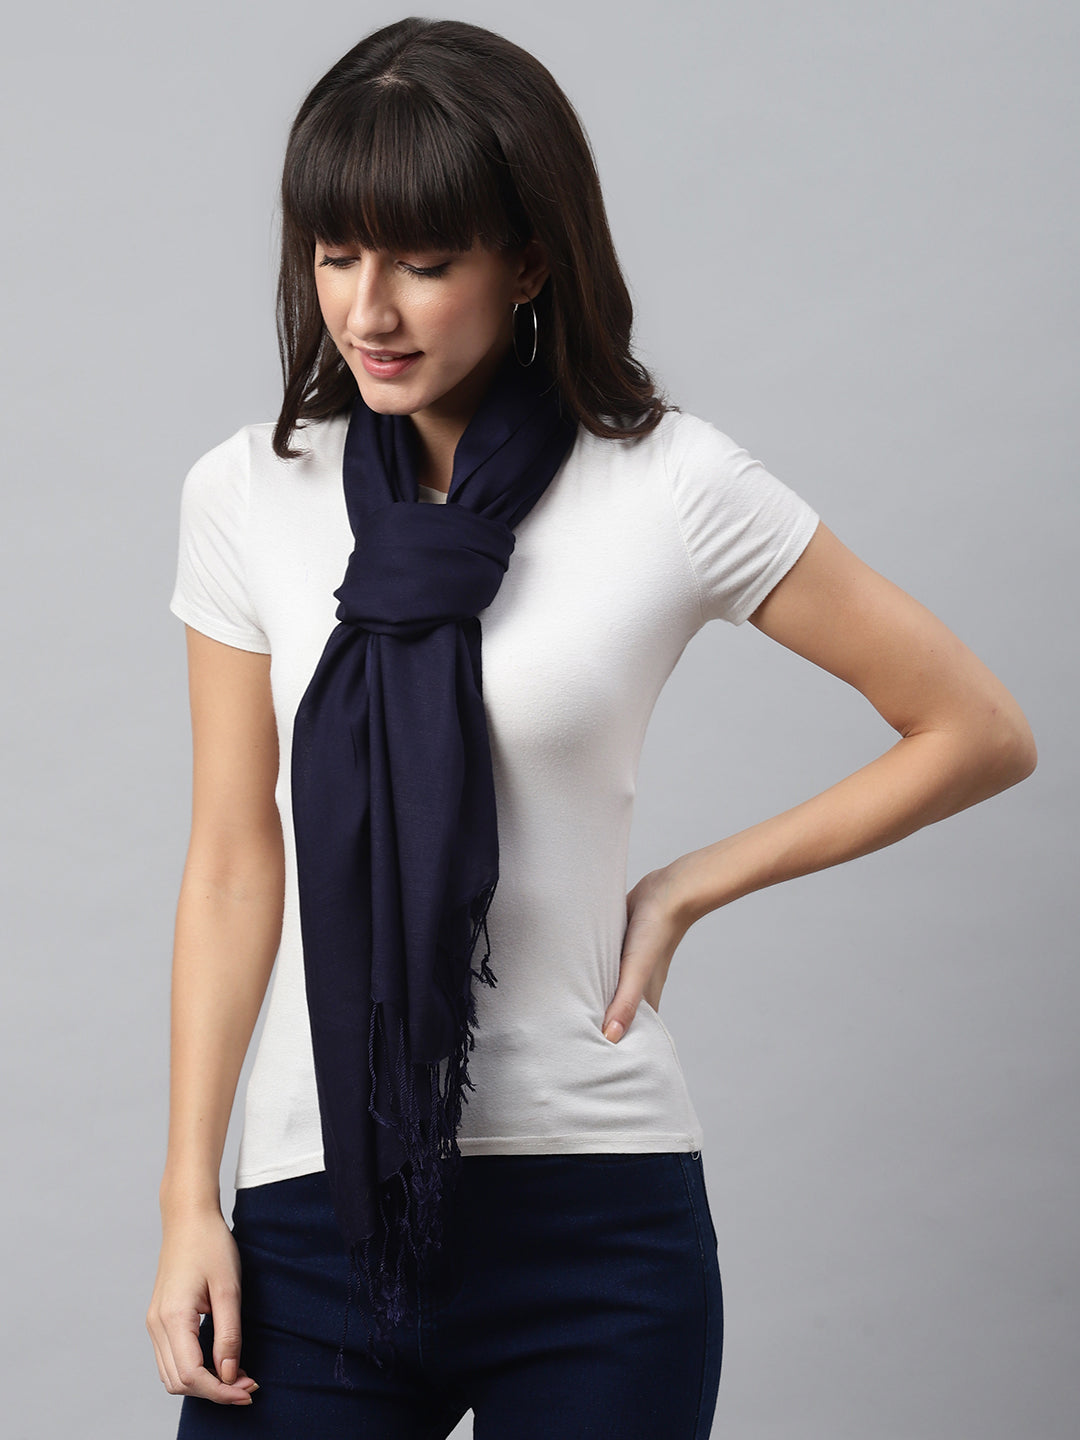 Navy Blue Rayon Solid Unisex Stole